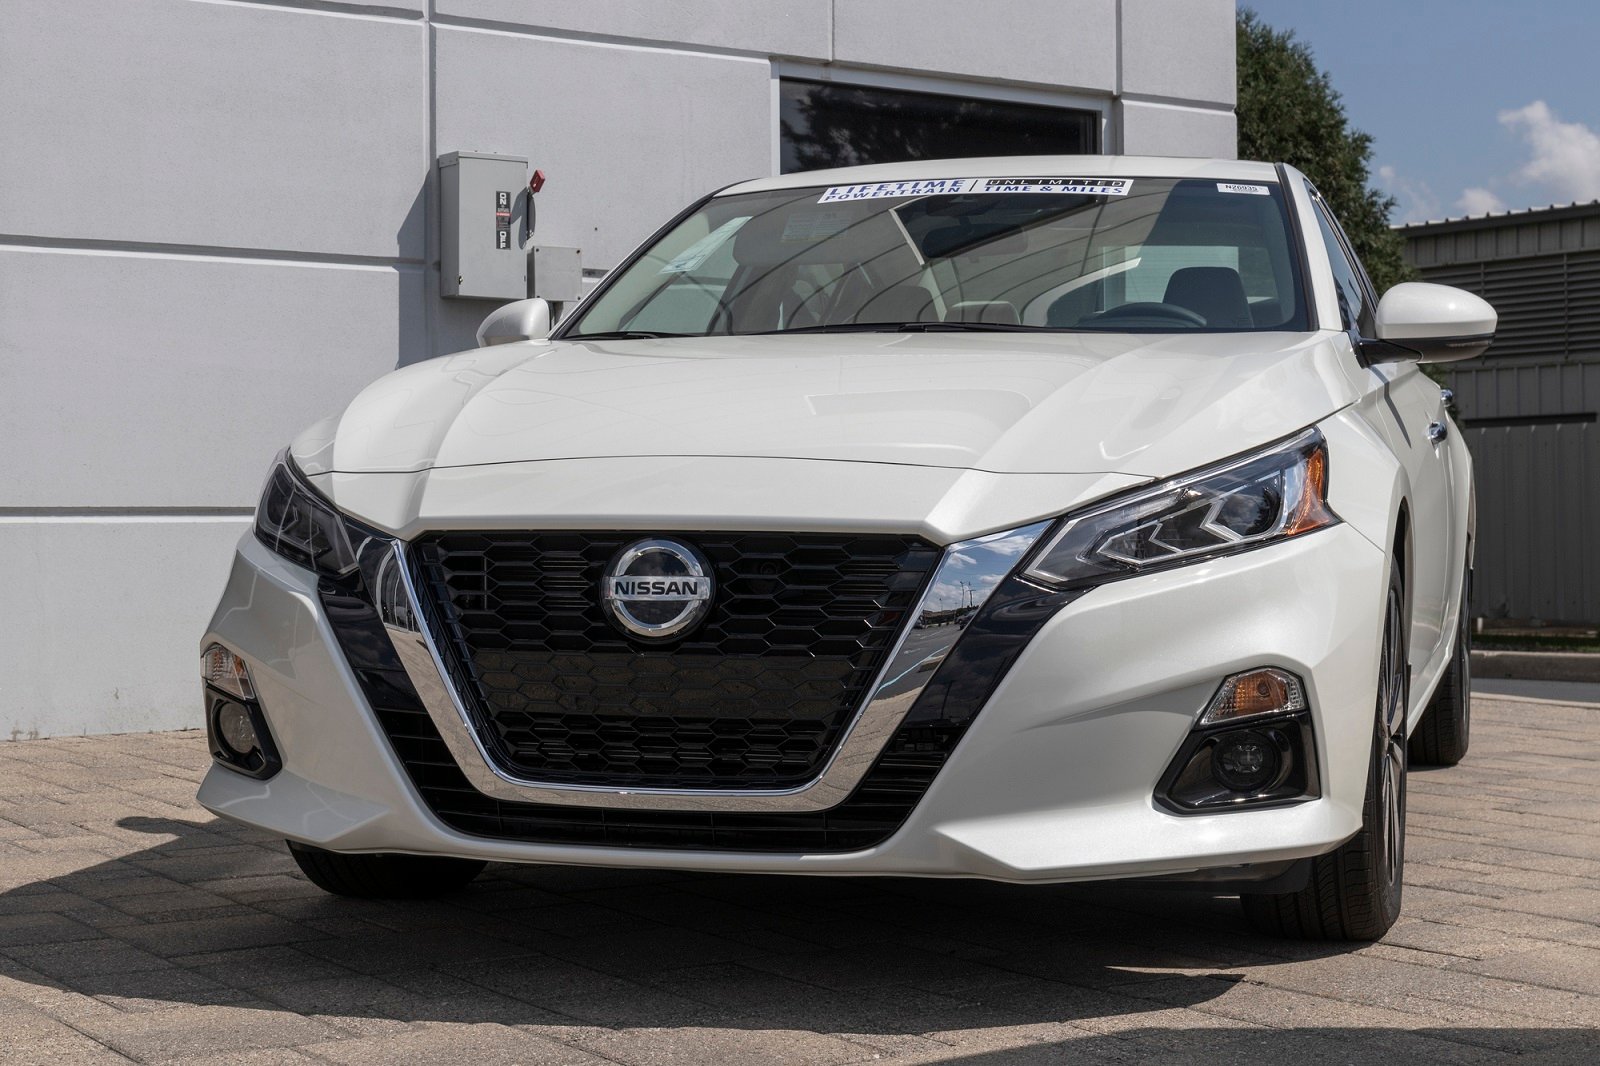 <p><span>Thinking of an older Nissan Altima? Think again. While it’s a veteran on the road, some models, like the <a href="https://www.miramarspeedcircuit.com/nissan-altima-years-avoid/">2013s Altima, have a less-than-stellar track record</a>. Their CVTs can cause stalling, slow acceleration, and choppy gear shifts. And it doesn’t stop there—from noisy power steering pumps to finicky air conditioners and steering wheel lock failures, you might end up spending more time at the shop than on the road. </span></p>